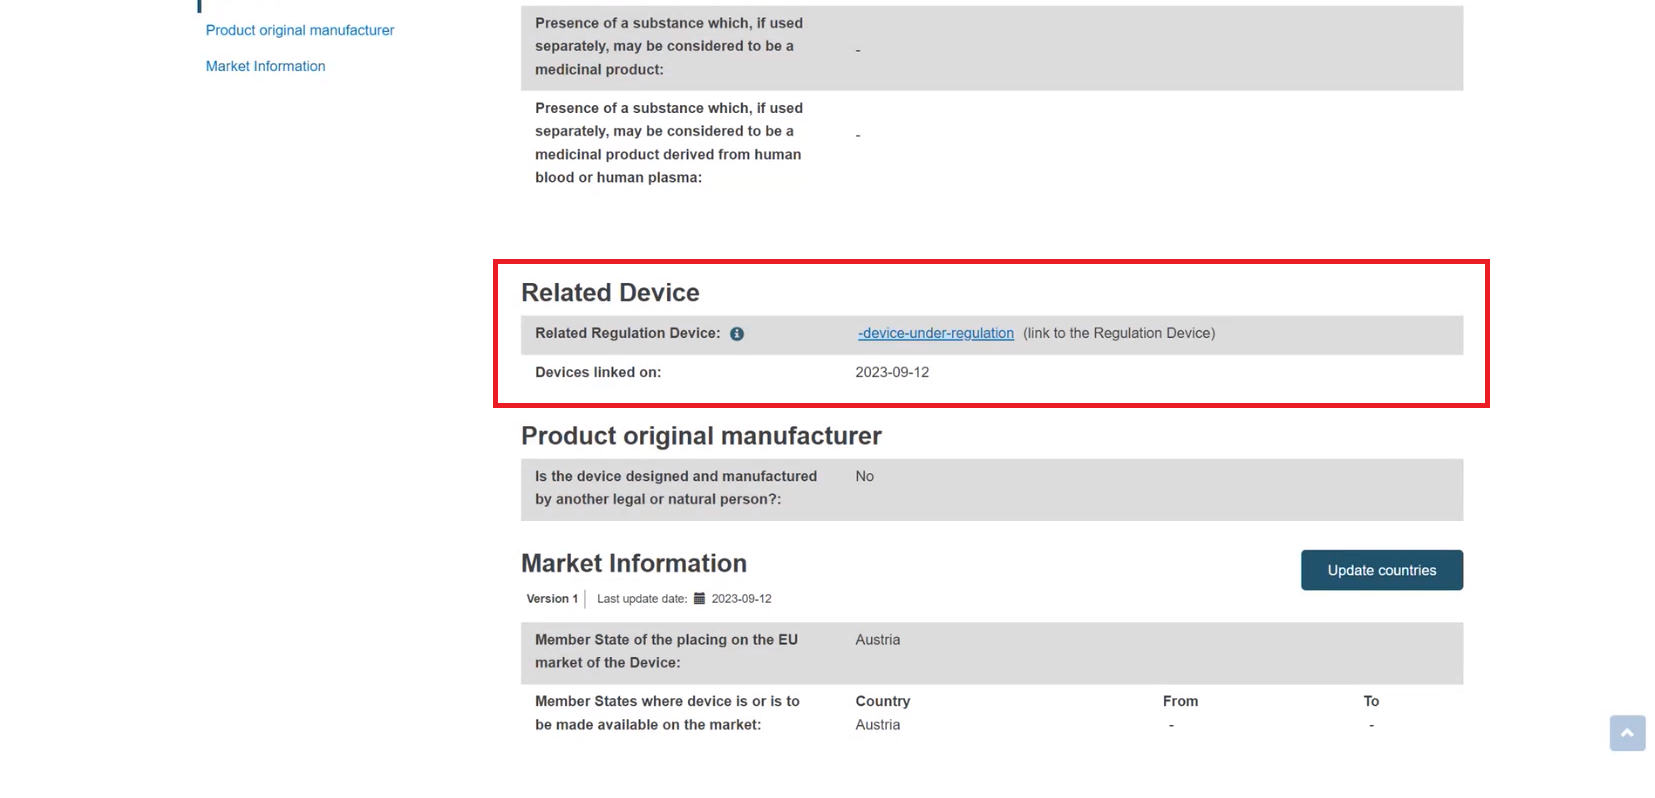 EUDAMED information on the linked regulation device under the related device section